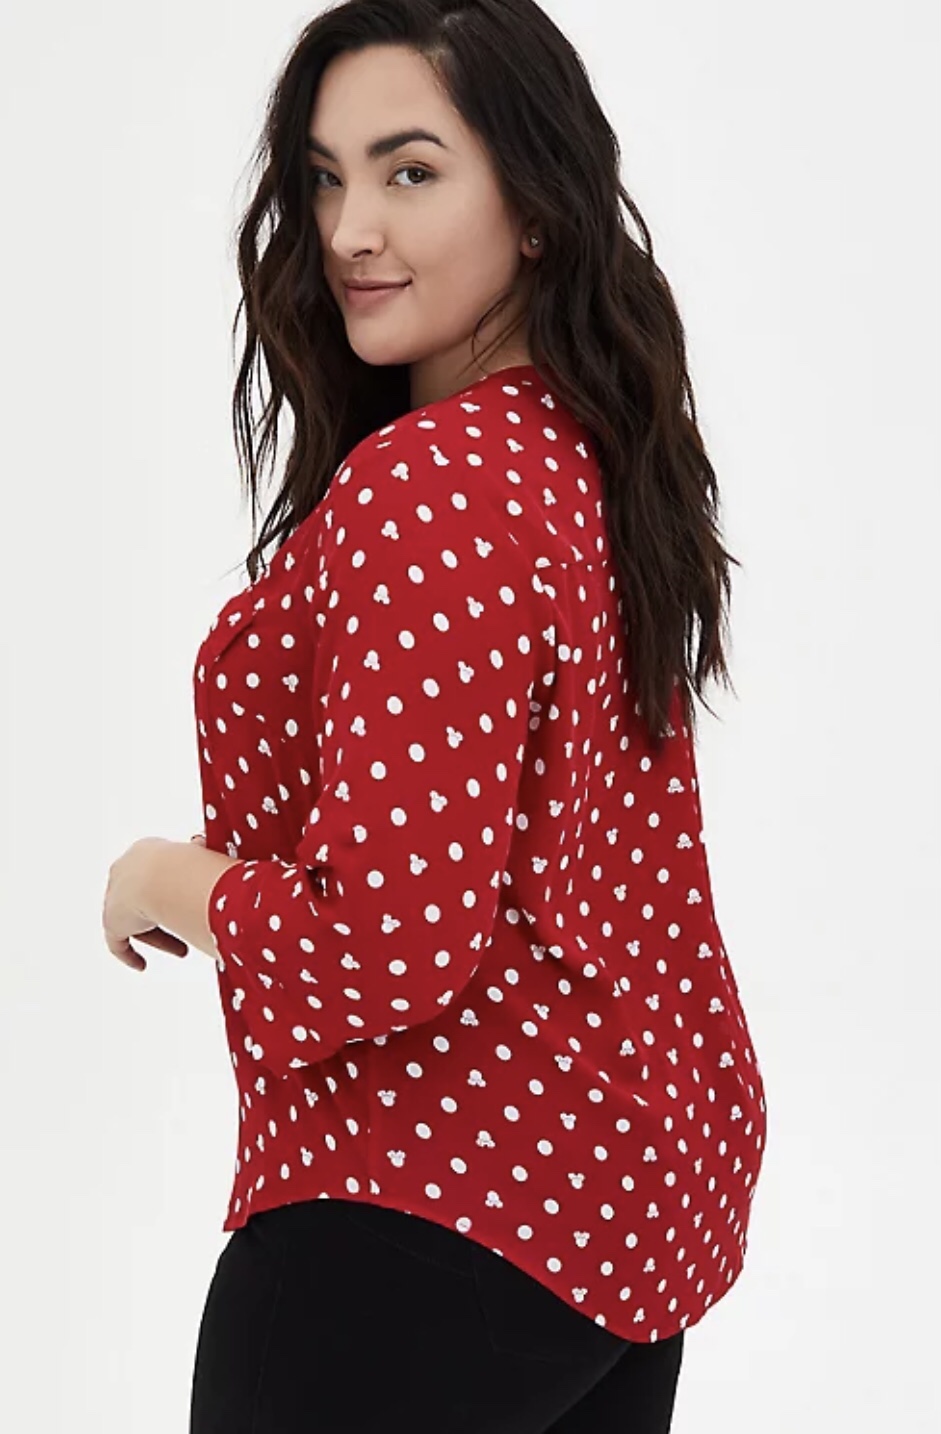 New Mickey and Minnie Pieces From Torrid Are Sweet and Stylish - Fashion